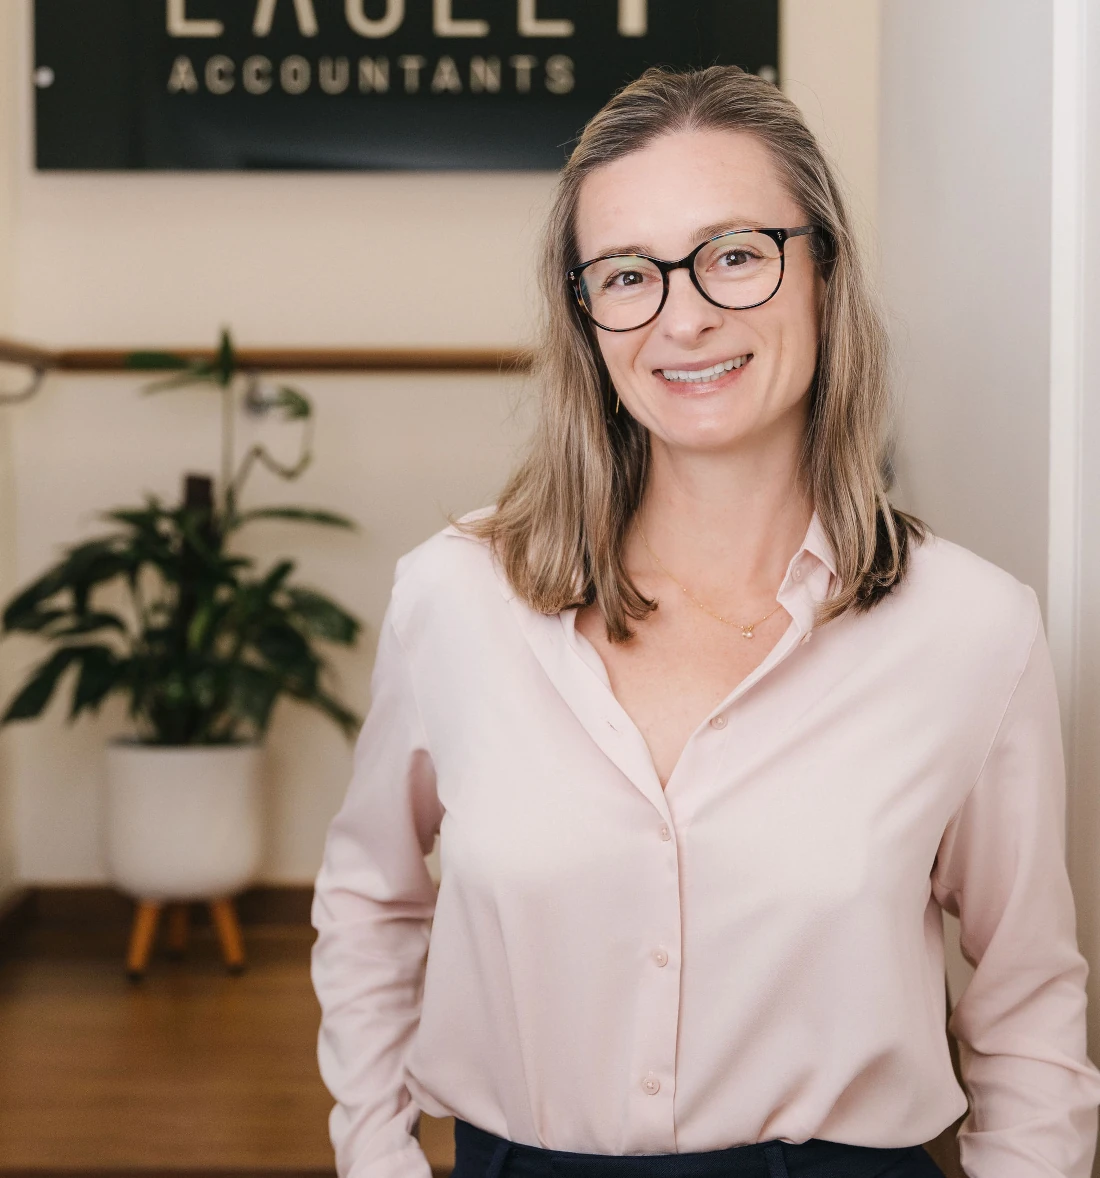 Meet Marina Business Structuring Services Eagle 1 Accountants